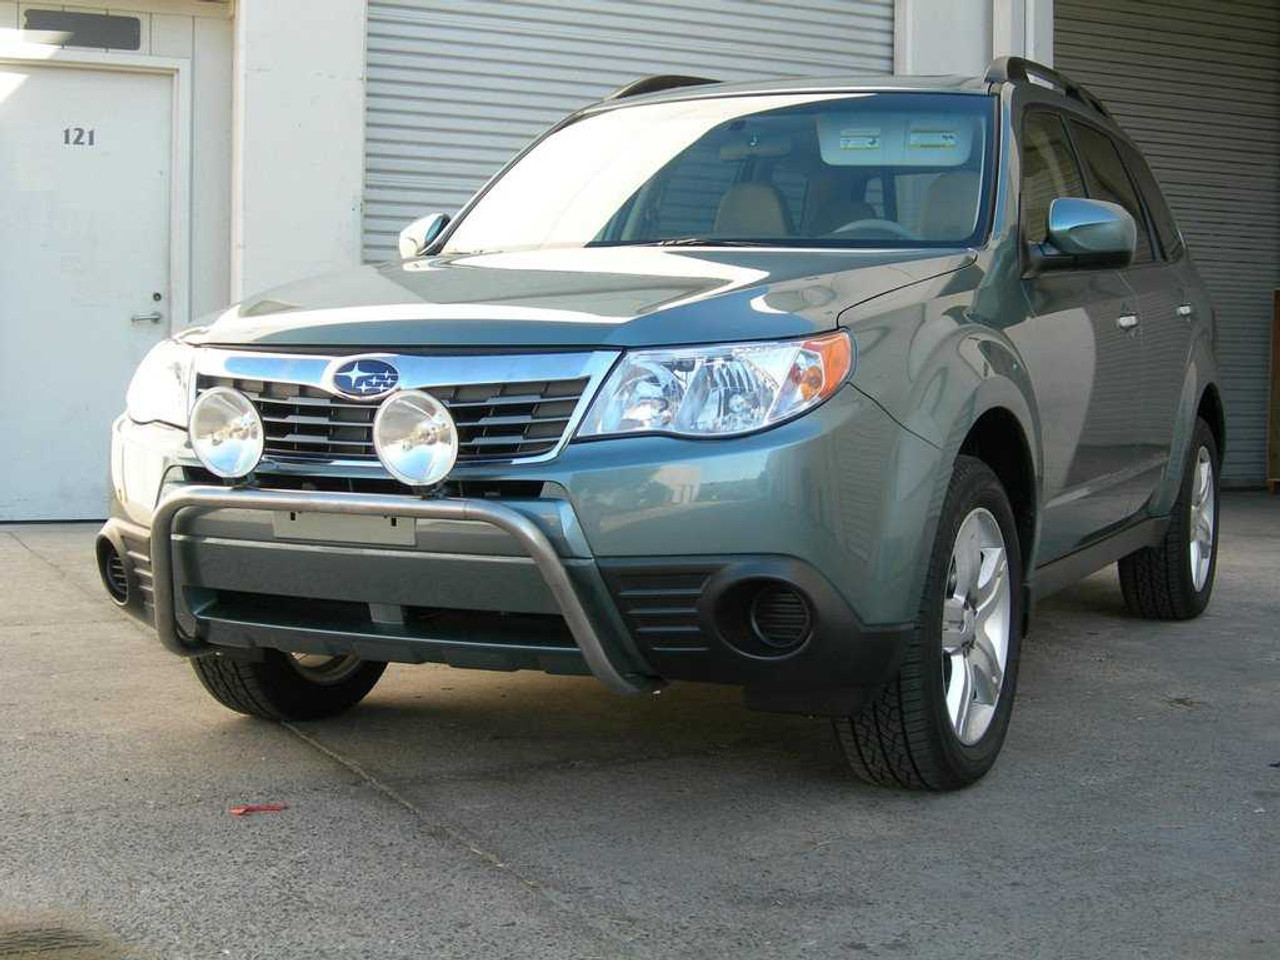 Auxiliary Off Road Driving Light Bumper Lamps for Subaru Forester